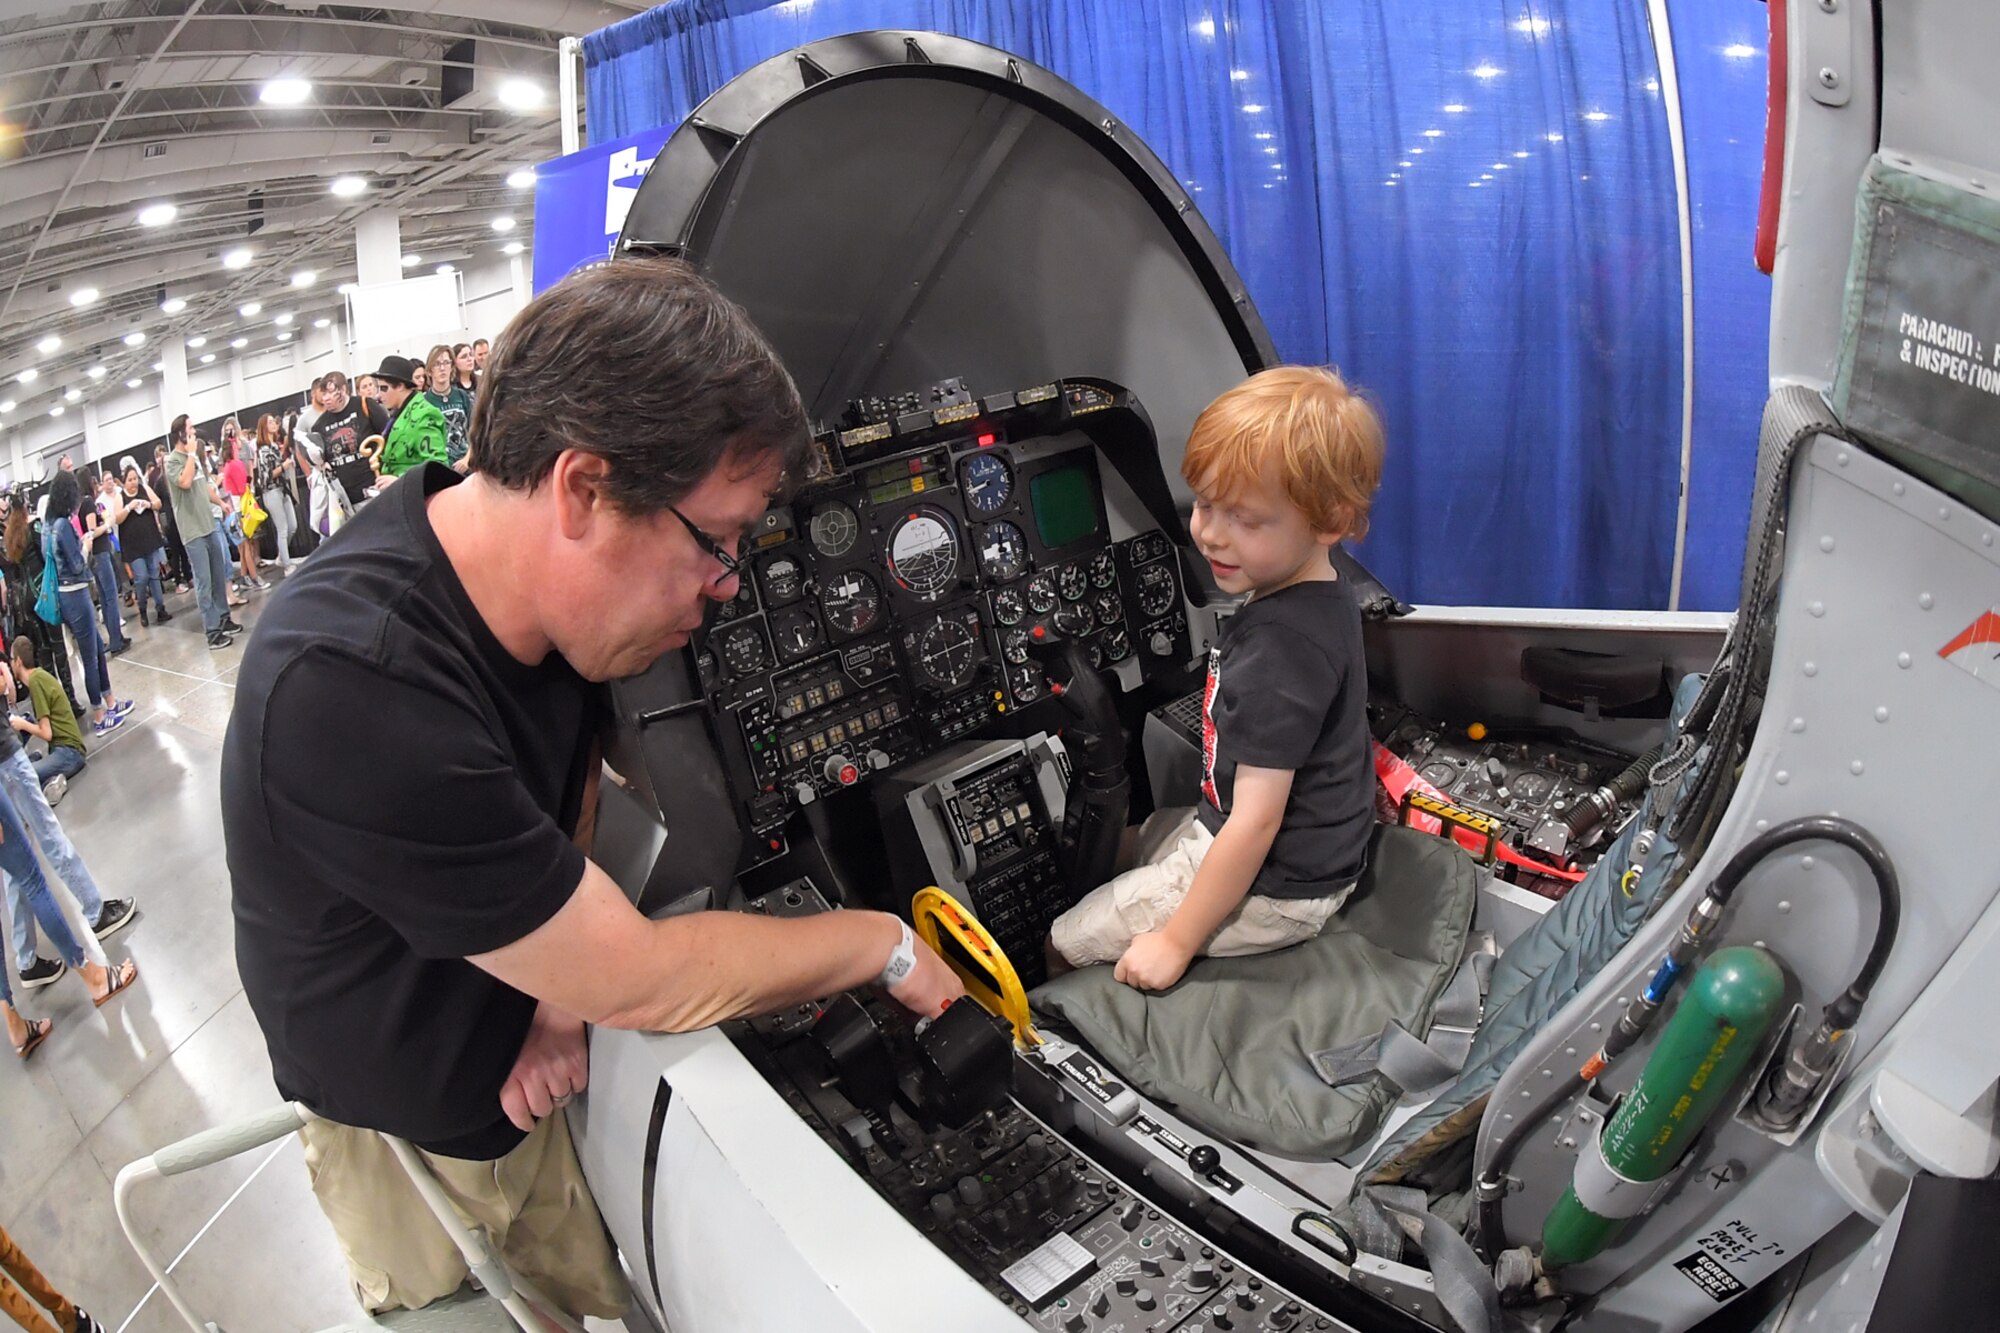 Visitors attending FanX experience an A-10 cockpit flight simulator at the Hill Air Force Base STEM Outreach booth, Sept. 7, Salt Lake City.